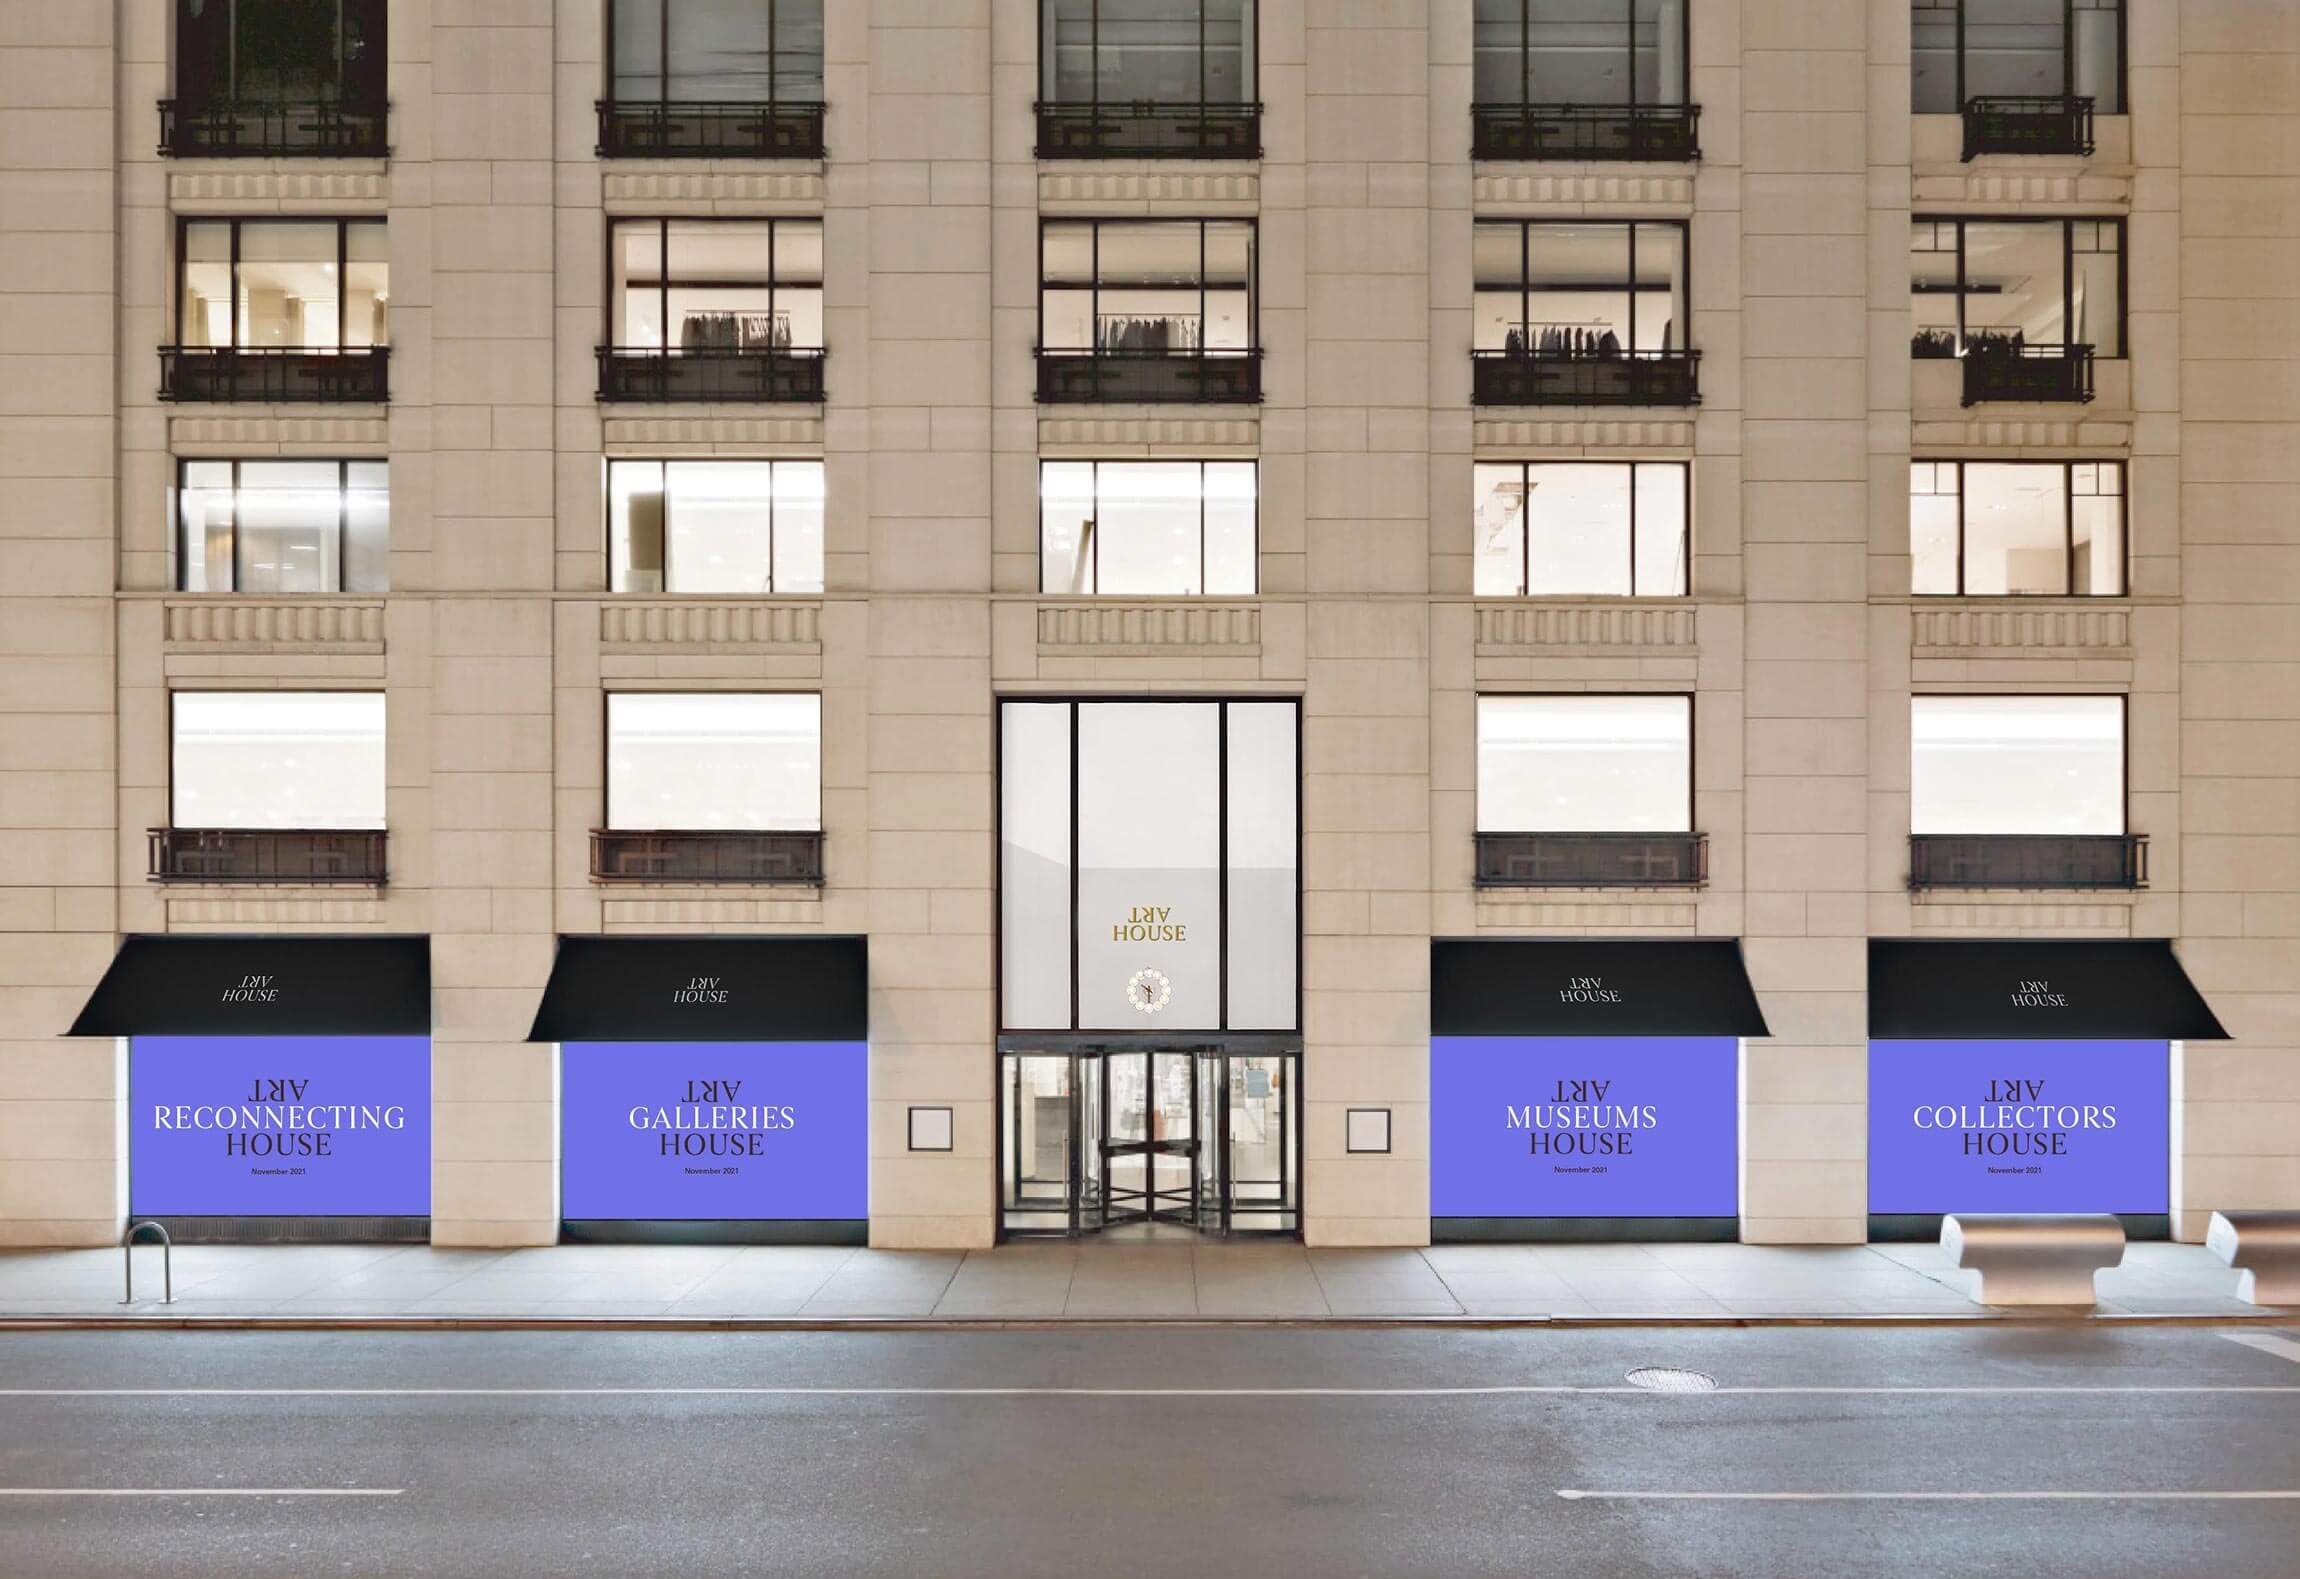 WHY Architecture will transform the former Barneys flagship into a  multifaceted fine arts hub